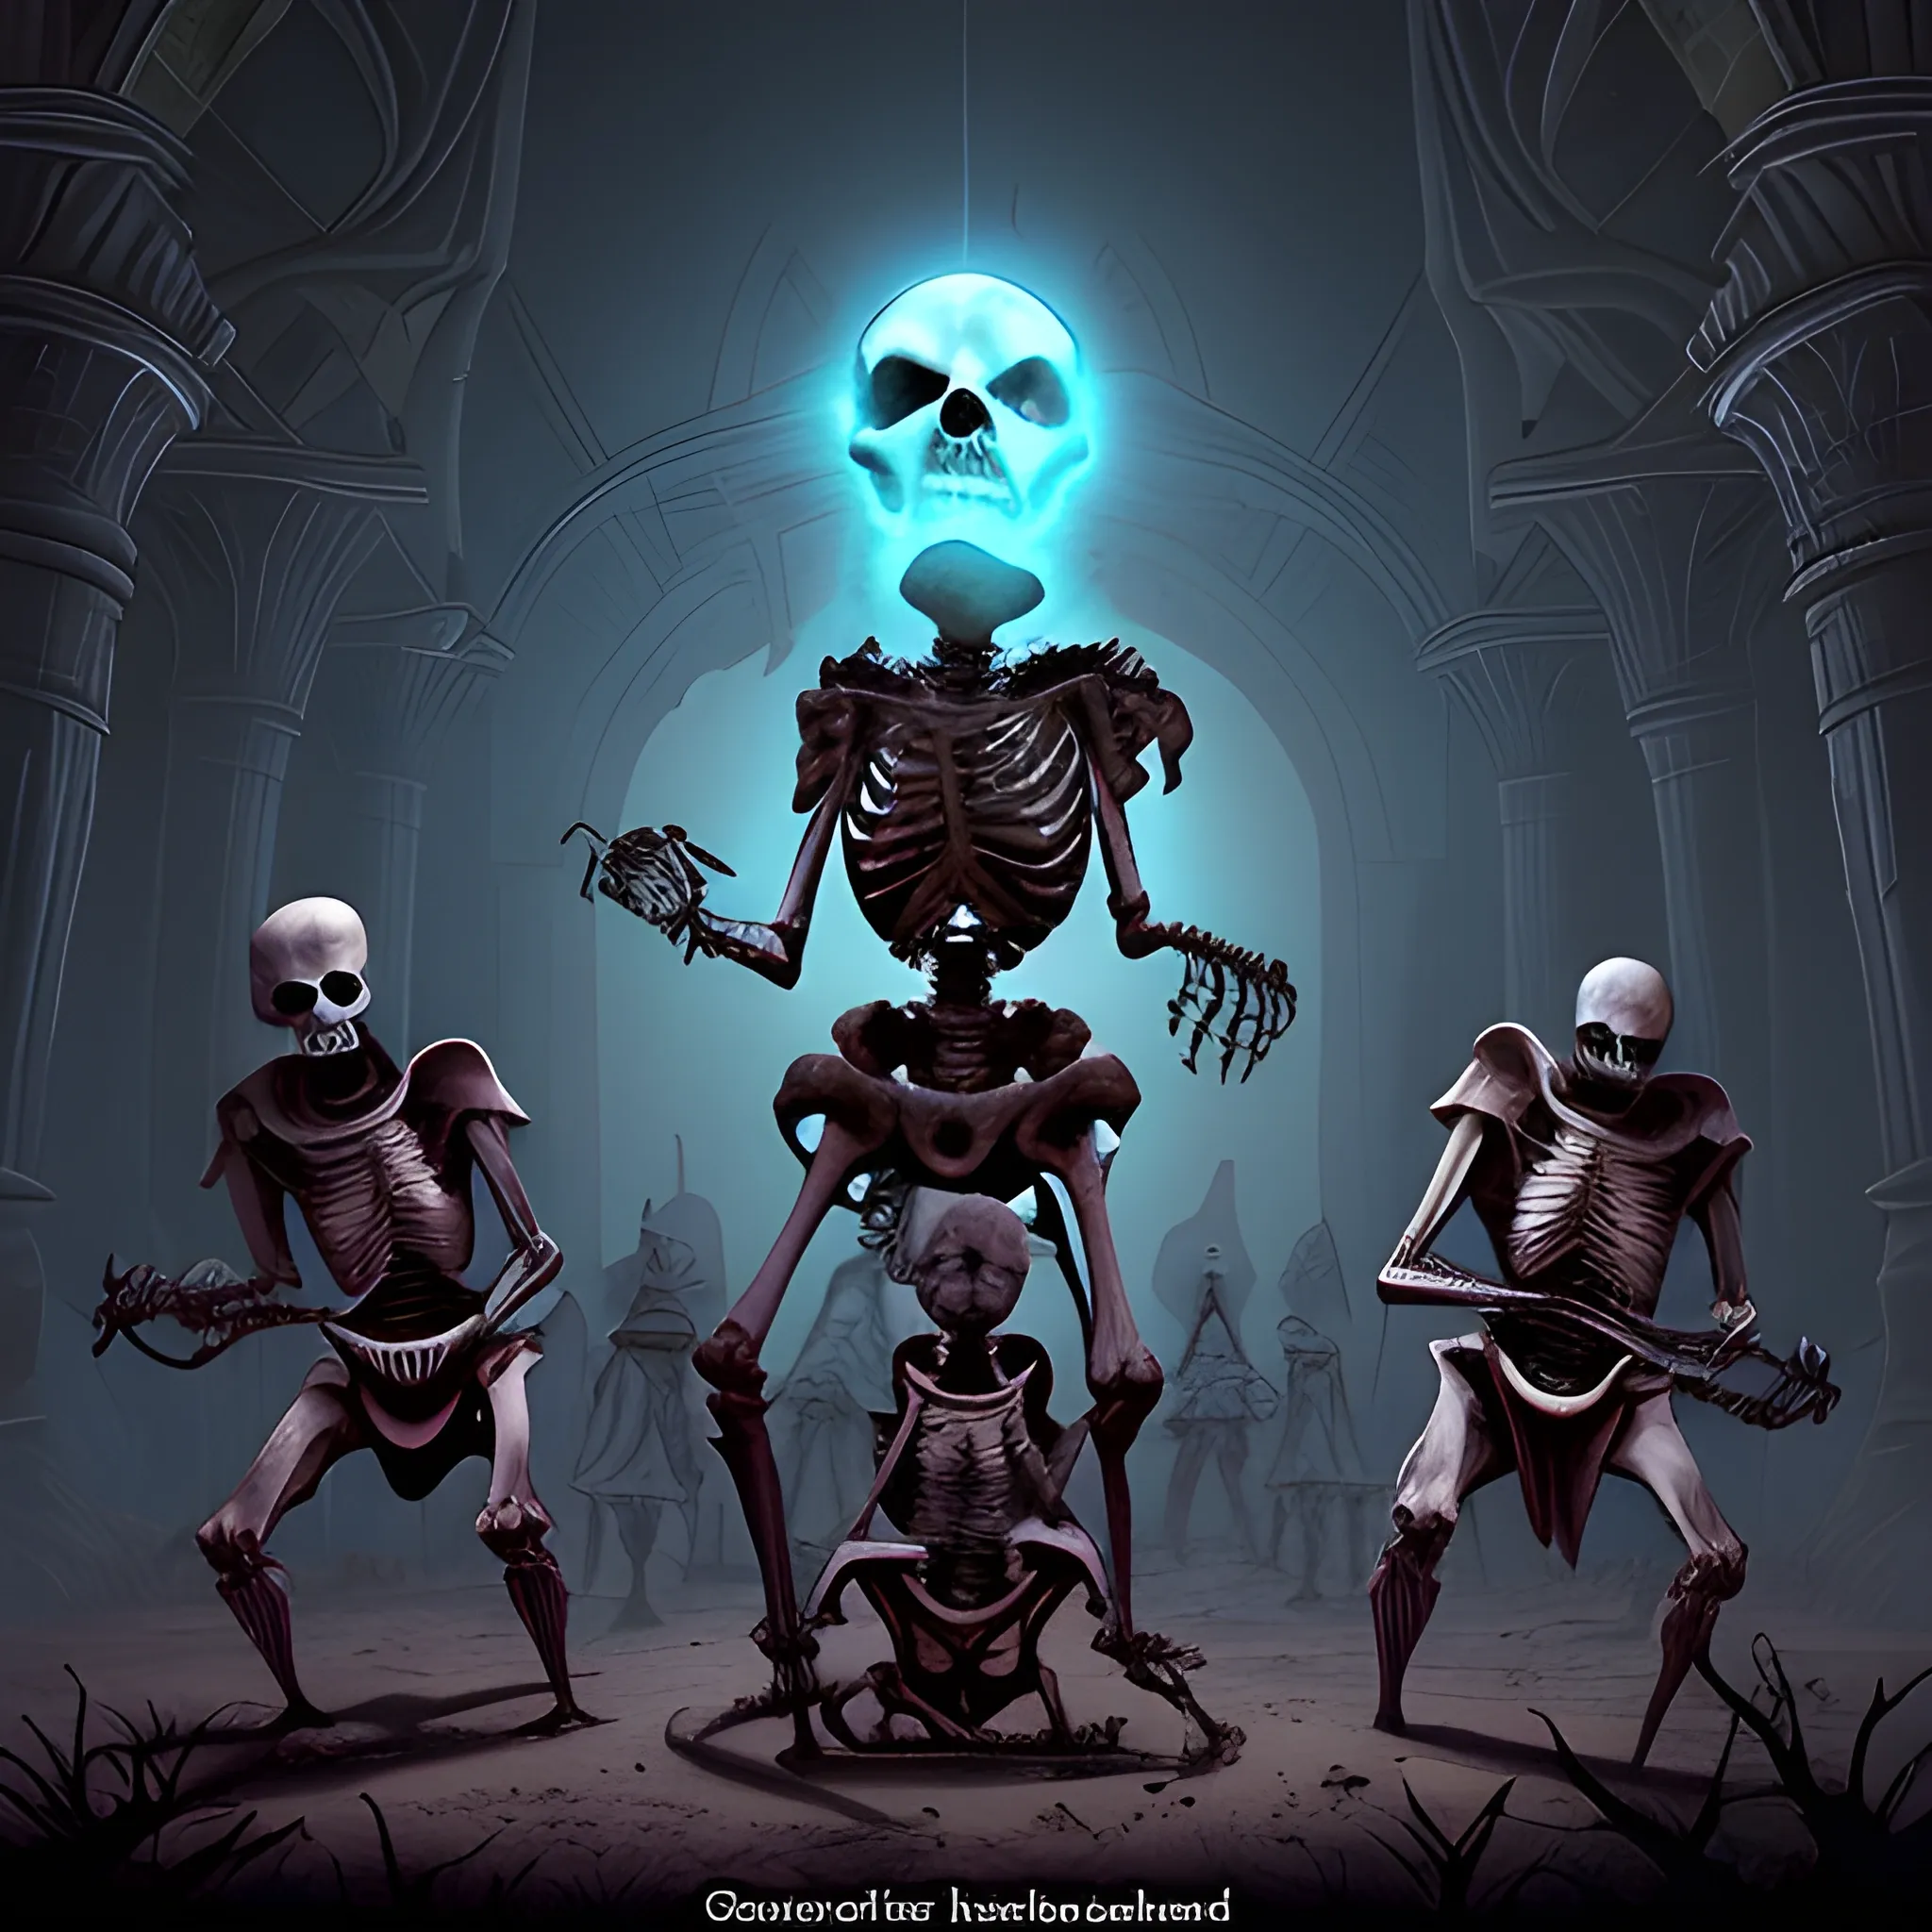 Appearance: A skeleton is a reanimated undead creature, the animated remains of a once-living being. They are skeletal in form, devoid of flesh and organs, and are held together by dark necromantic magic. Their bones can be of various sizes and shapes, depending on the creature they were before death. The bones of a humanoid skeleton are often bleached white, while those of larger creatures might retain a more weathered appearance.

Features: Skeletons are mindless creatures, devoid of the emotions and intellect they possessed in life. Their movements are stiff and jerky, controlled by the magic that animates them. They lack the strength and capabilities they had in life but can still be formidable due to their resistance to exhaustion and immunity to poison and many mind-affecting spells.

Habitat: Skeletons can be found in various environments, wherever dark necromantic magic is practiced or where ancient burial sites have been disturbed. They are often encountered in crypts, dungeons, or as guardians of forgotten tombs. In your DND world, they might be the remnants of fallen warriors or victims of dark rituals, arising to serve their necromantic masters.

Behavior: As mindless undead, skeletons are compelled to follow the commands of their creators or necromancers who control them. They have no will of their own and exist solely to fulfill the tasks assigned to them. Whether that means guarding a location, attacking intruders, or carrying out a specific purpose, skeletons are bound to carry out their orders until they are destroyed.

Role in the World: In your DND world, skeletons could serve as a constant reminder of the dark arts and the dangers of necromancy. They may be used by evil necromancers as minions or guardians, lurking in ancient crypts or dungeons to deter intruders. Adventurers might encounter them in their quest to thwart dark forces or uncover the secrets of long-forgotten ruins.

Encountering a skeleton in your campaign often means dealing with a mindless foe that is immune to many traditional methods of persuasion. Adventurers might use various tactics to overcome them, such as using holy magic, radiant damage, or weapons that can shatter or disassemble the undead. While individually not as threatening as some other creatures, the real challenge lies in facing hordes of skeletons, as their numbers can quickly overwhelm unprepared adventurers.